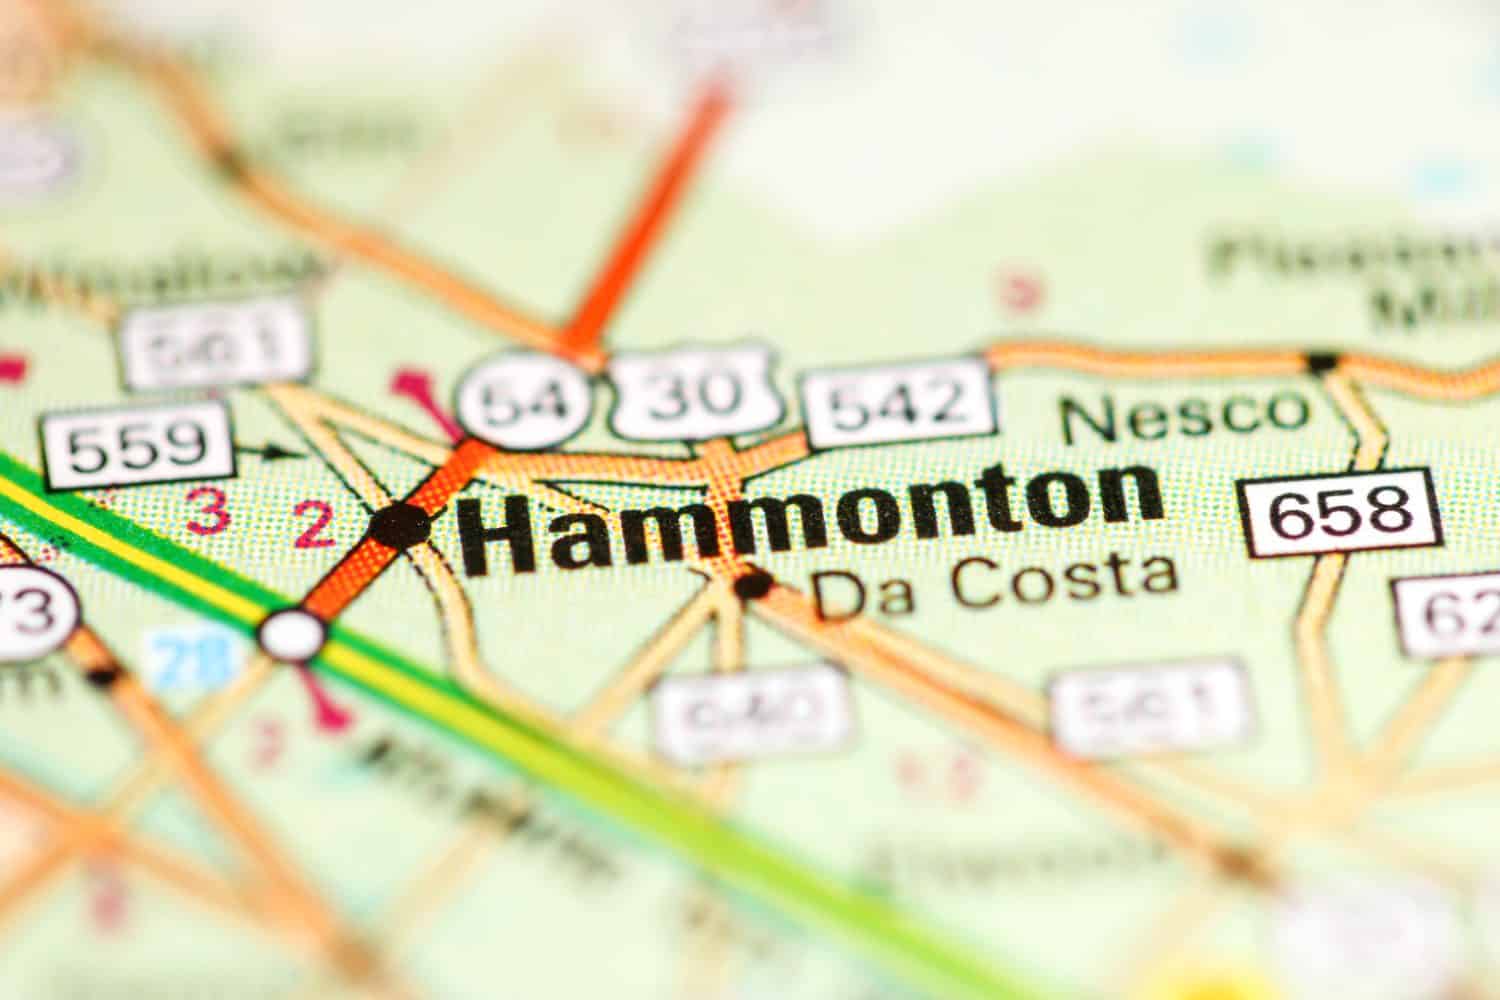 Hammonton. New Jersey. USA on a geography map